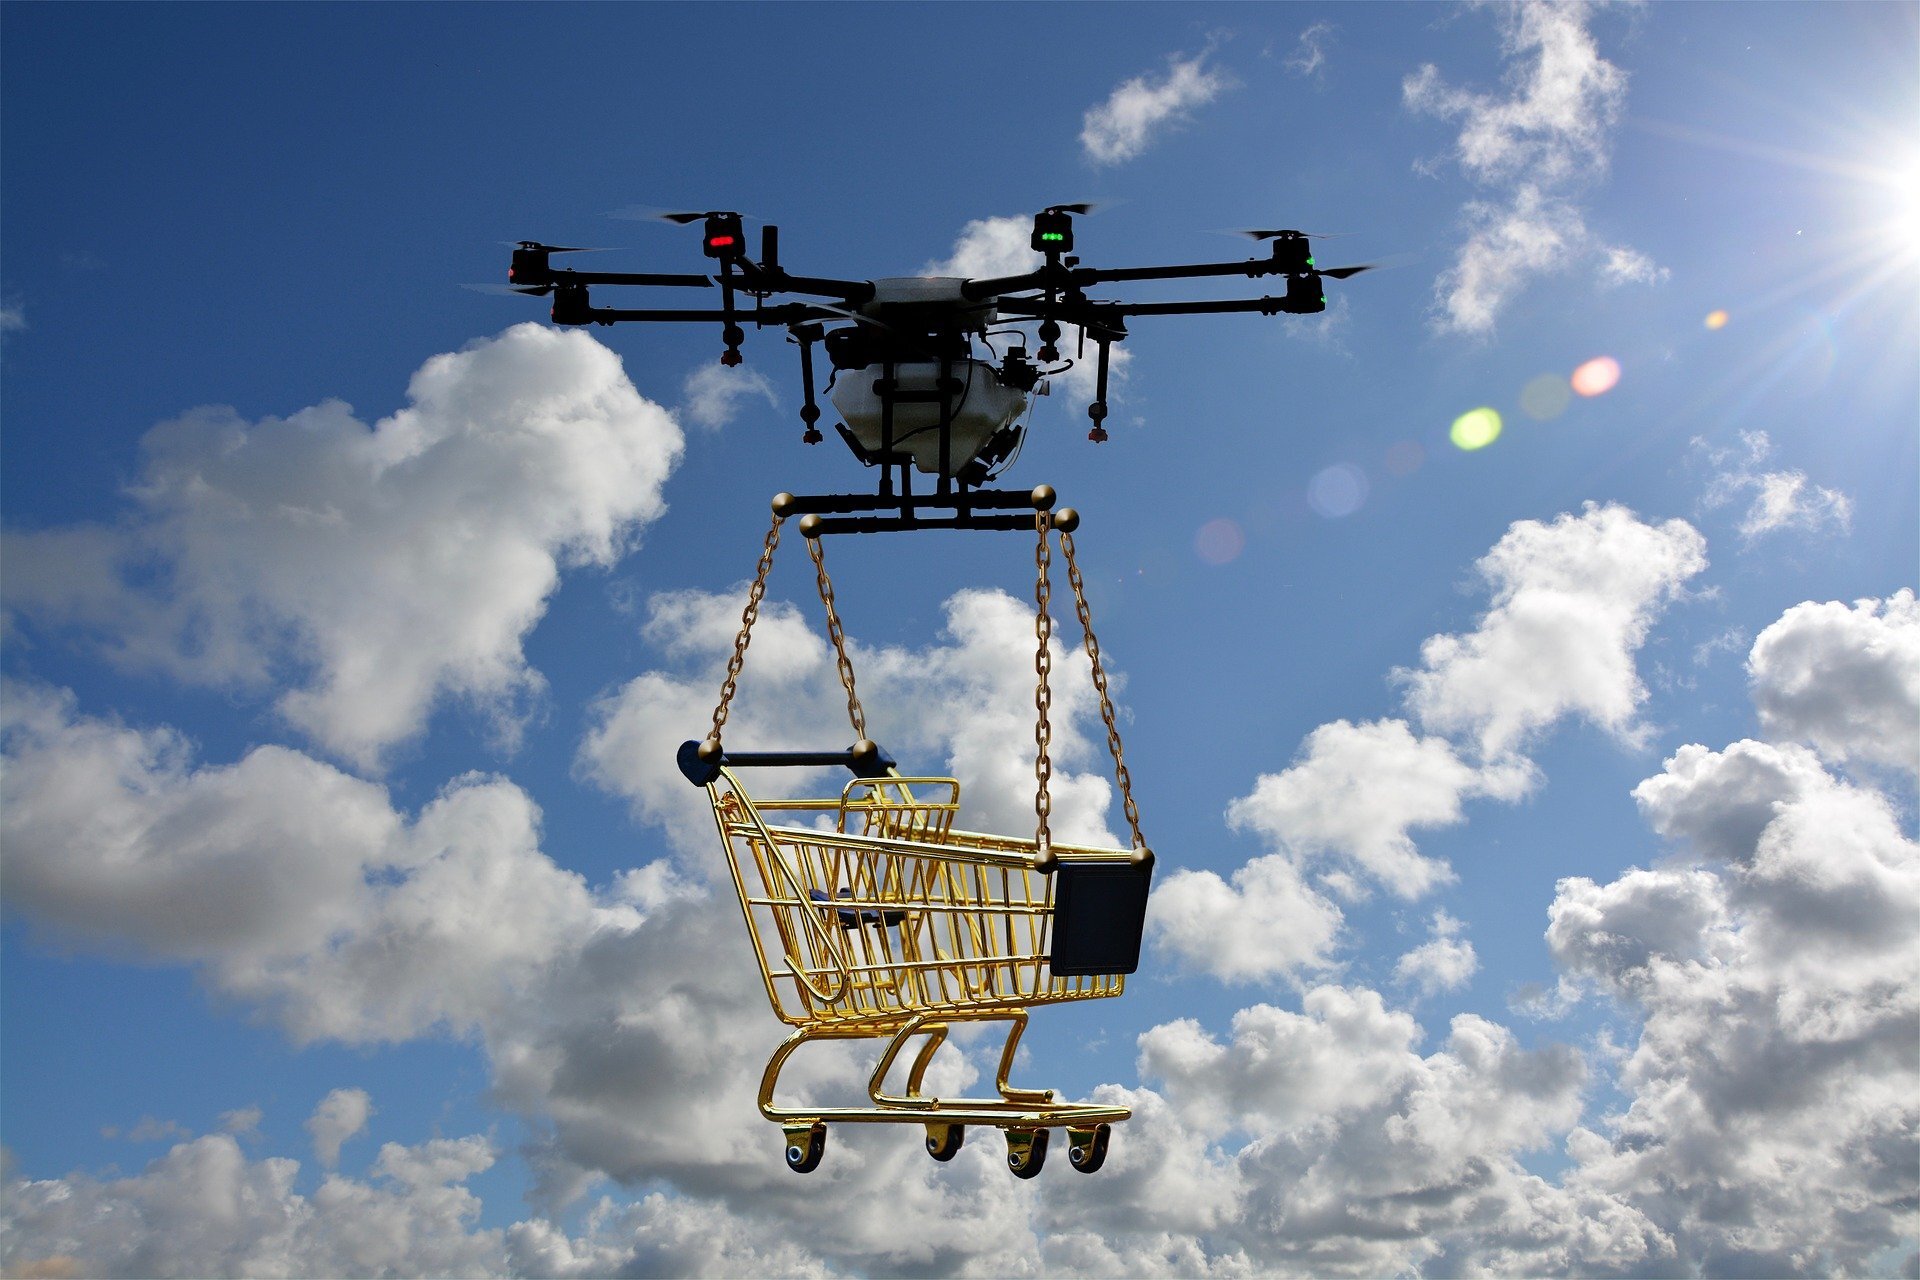 Drone delivery is a thing now. But how feasible is having it everywhere, and would we even want it?